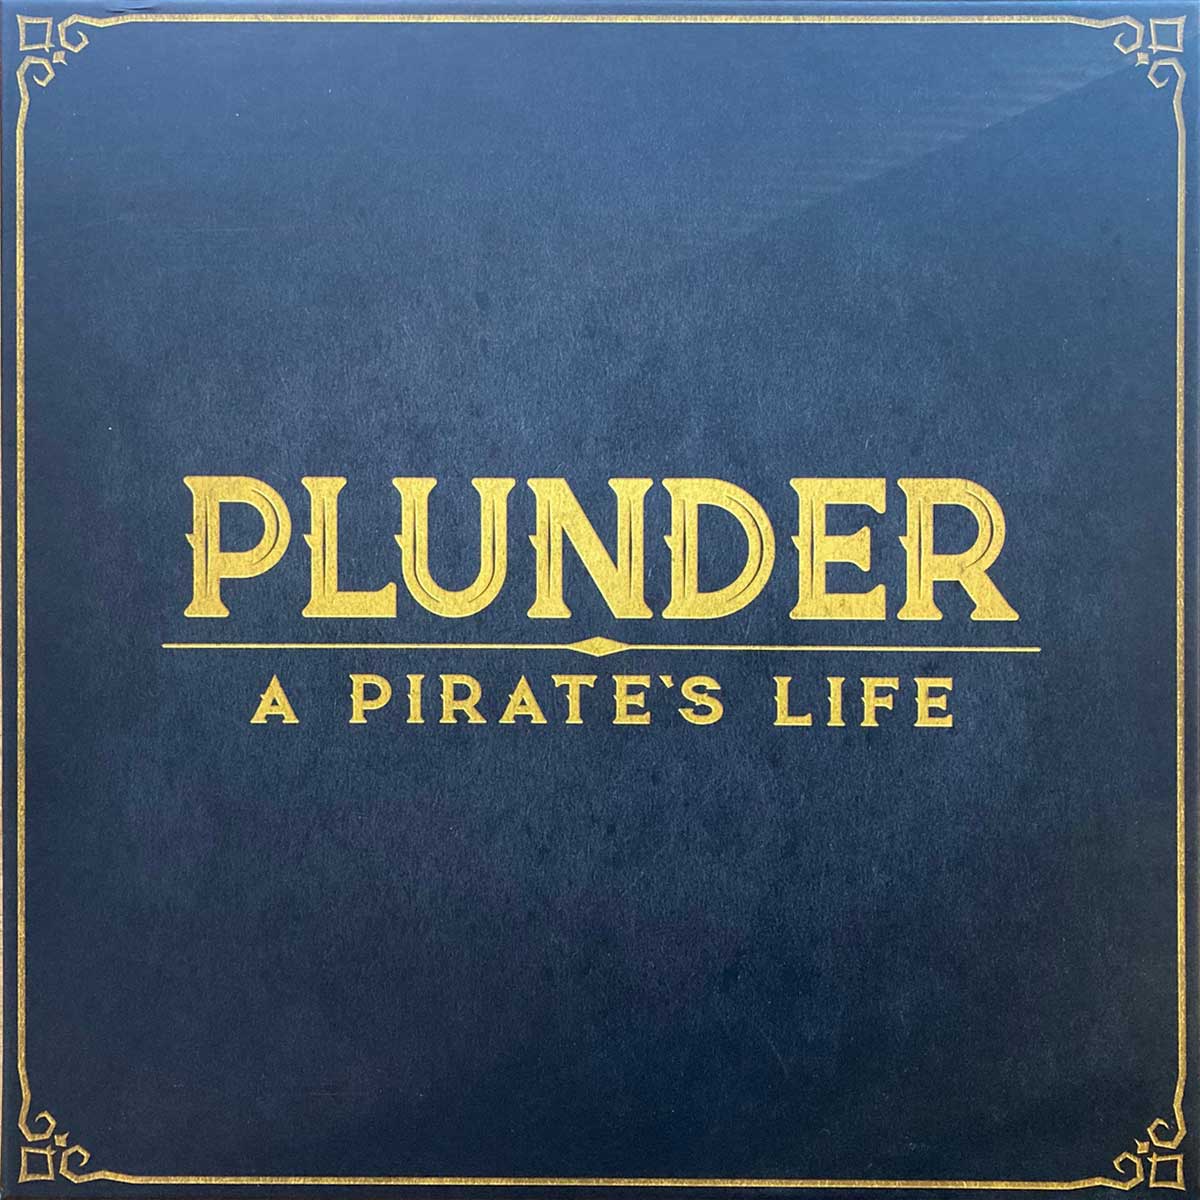 Game Play Review - Plunder: A Pirate's Life